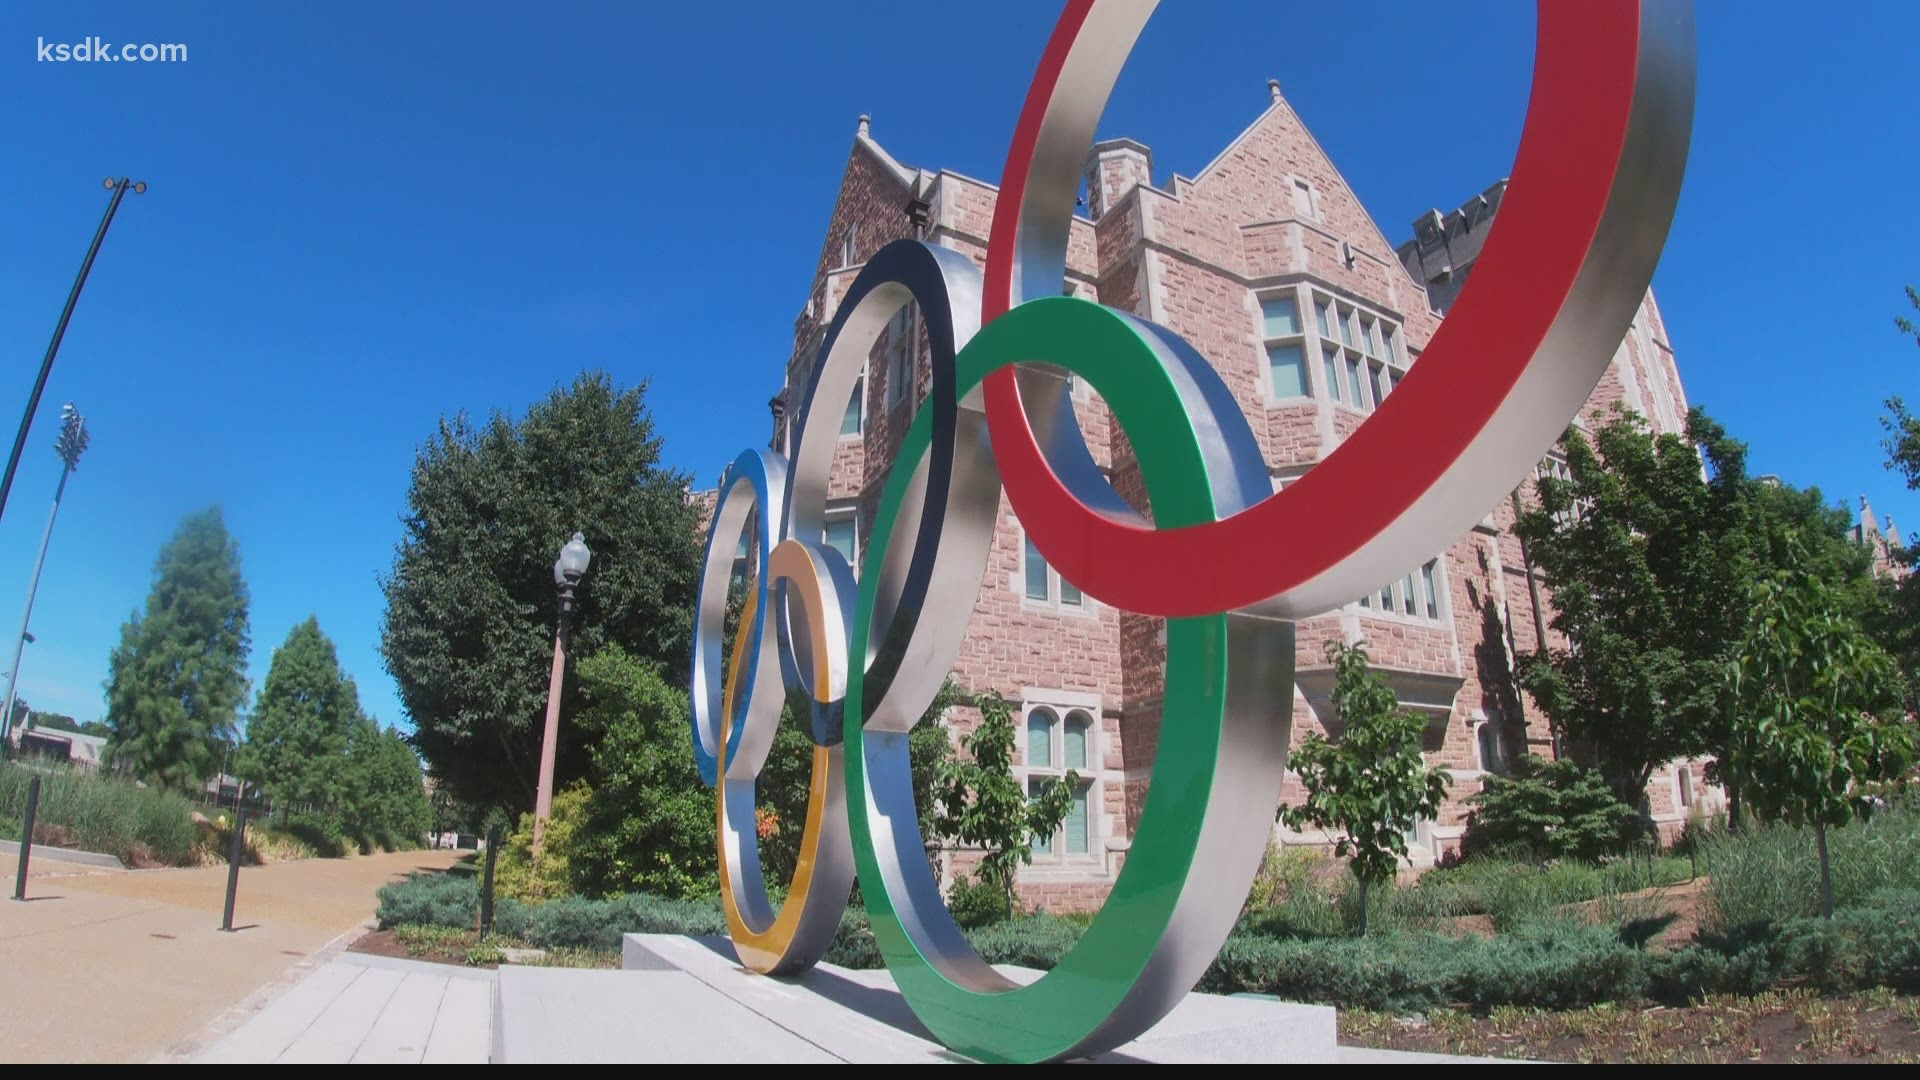 From the 1904 Olympics to the legendary Olympians from the region, St. Louis has shaped the Games. Rene Knott shows us how.